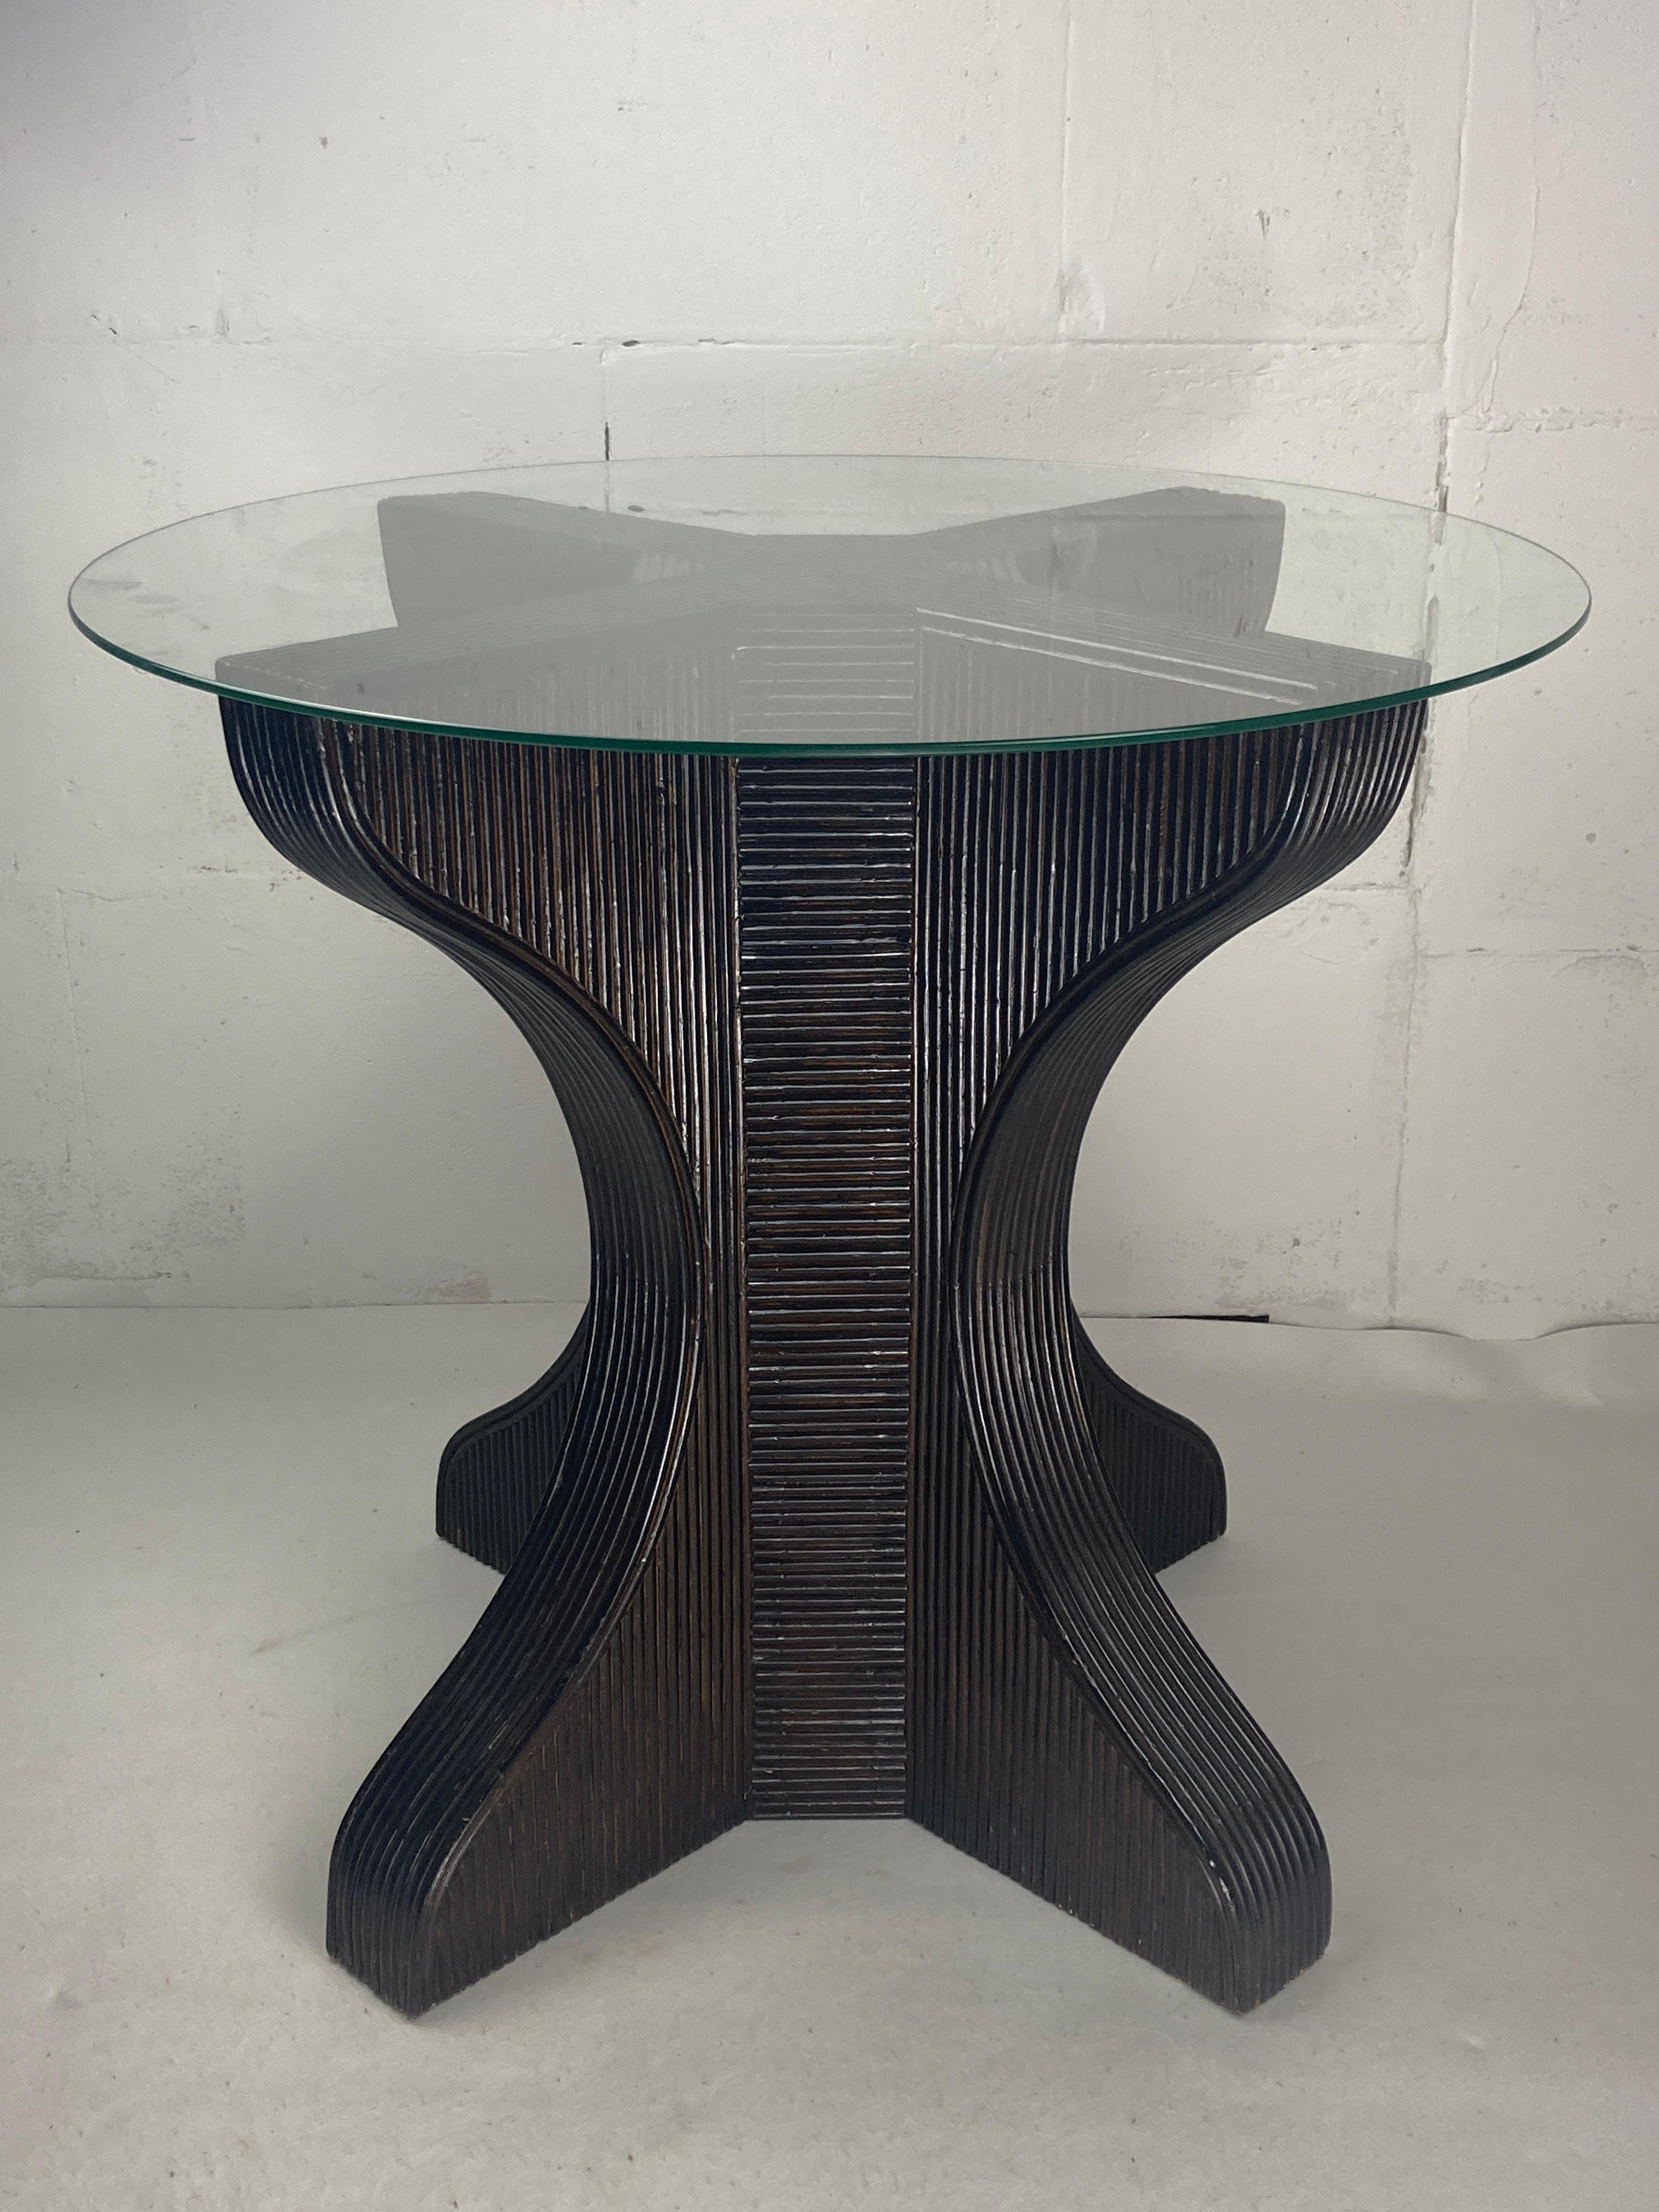 Pencil reed rattan bamboo dining or side table base with smoked glass top, 1970s For Sale 8